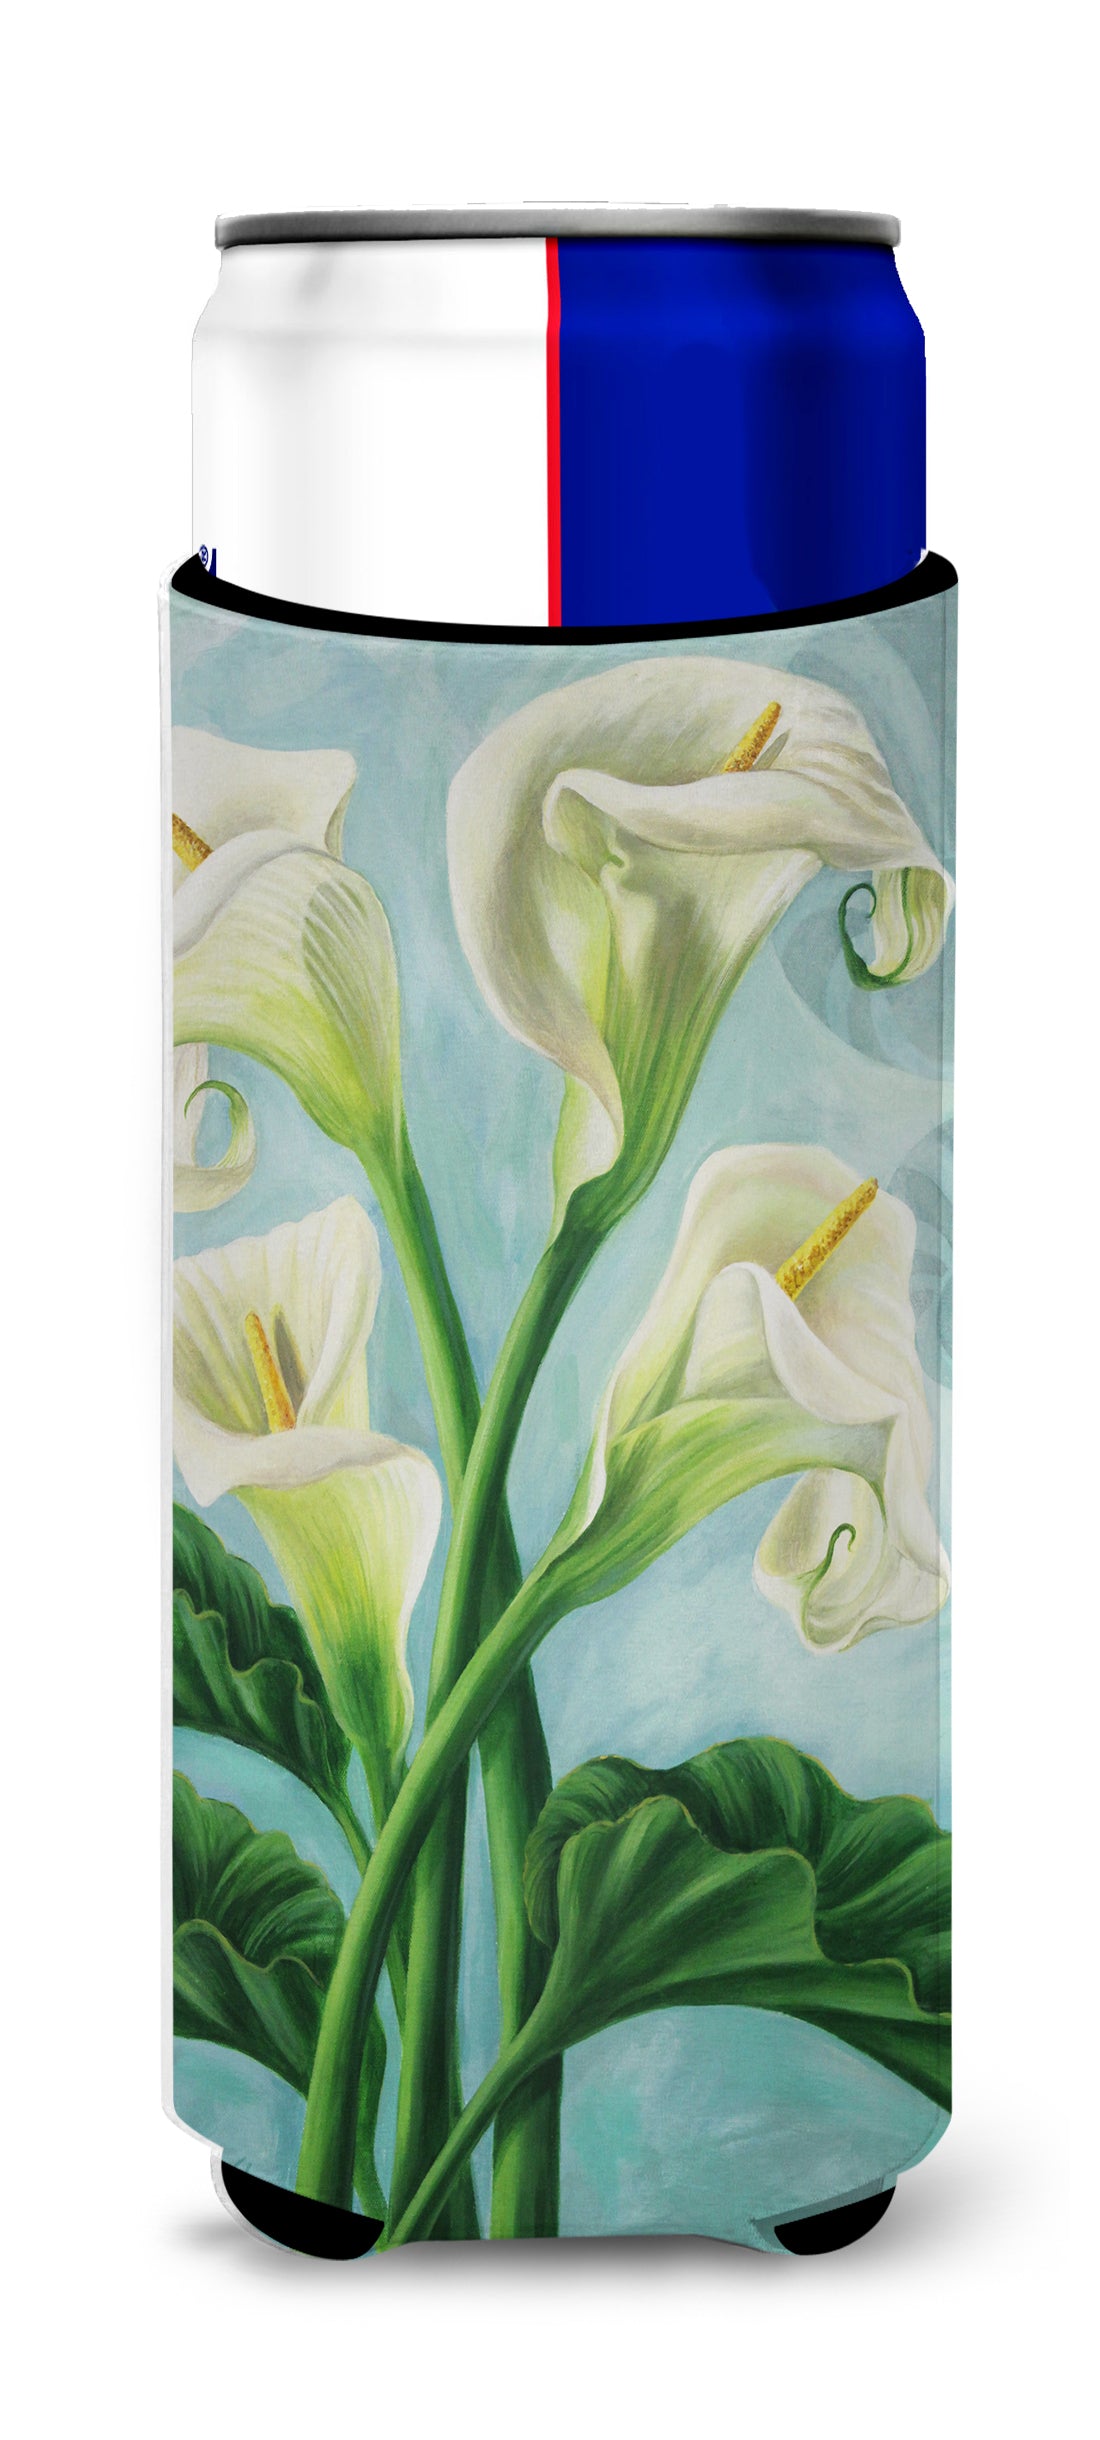 Arum Lilly by Judith Yates Ultra Beverage Insulators for slim cans JYJ0070MUK